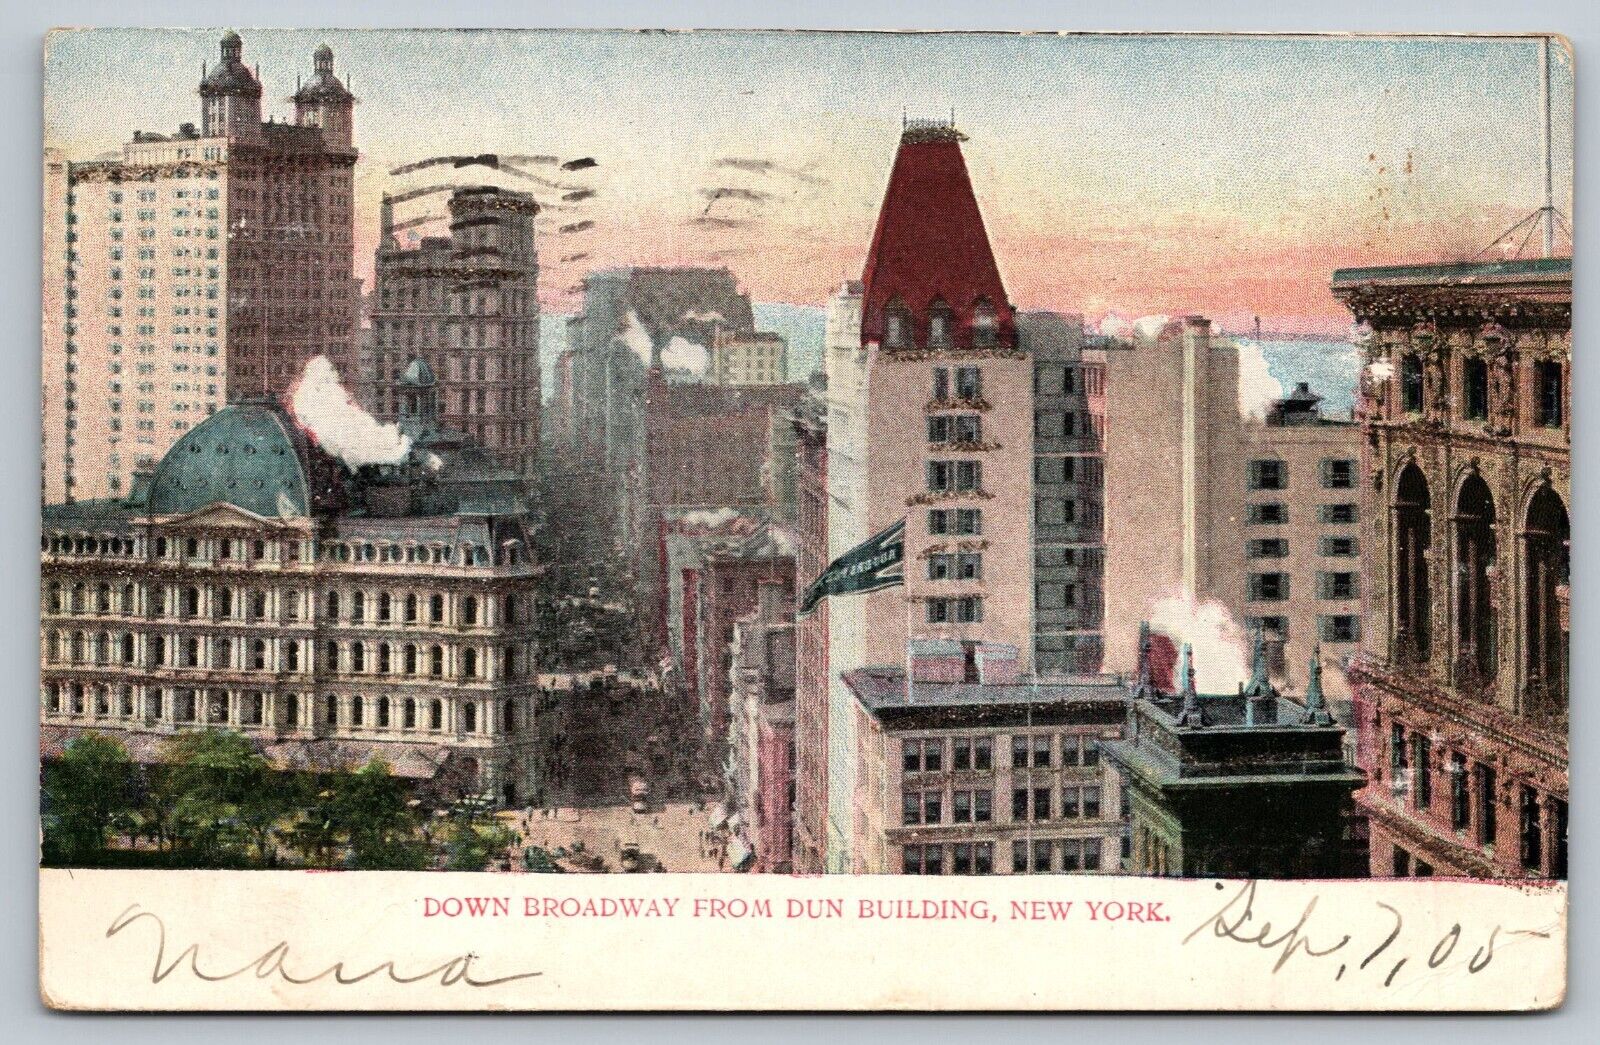 Vintage 1906 Postcard Down Broadway from Dun Building, New York City